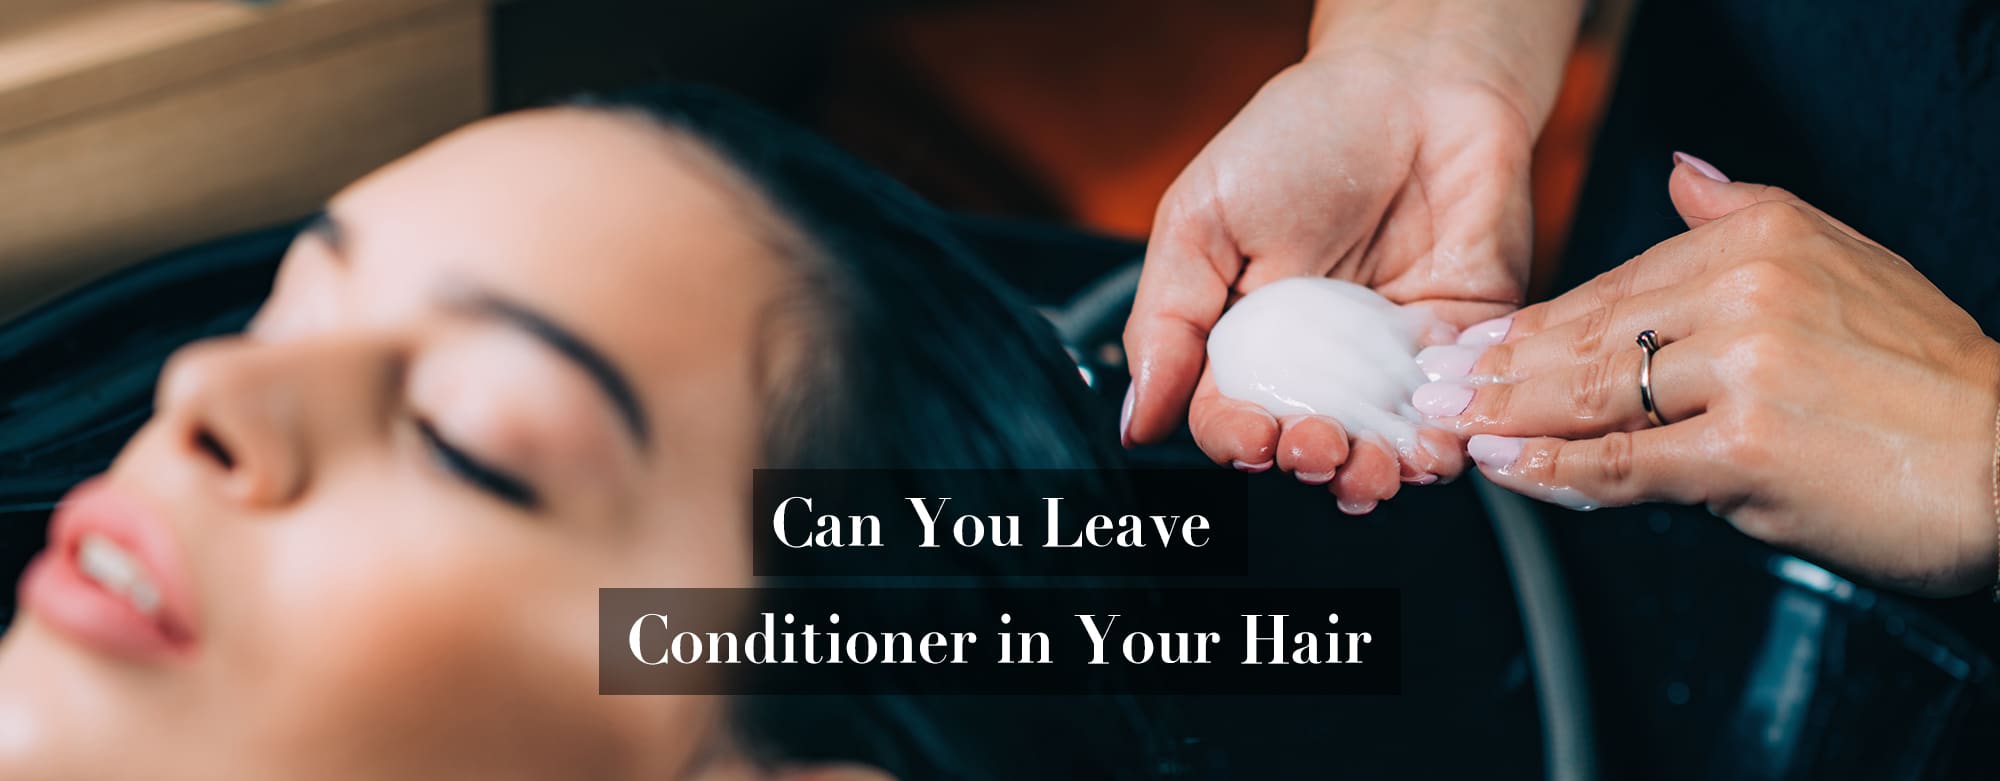 can you leave conditioner in your hair